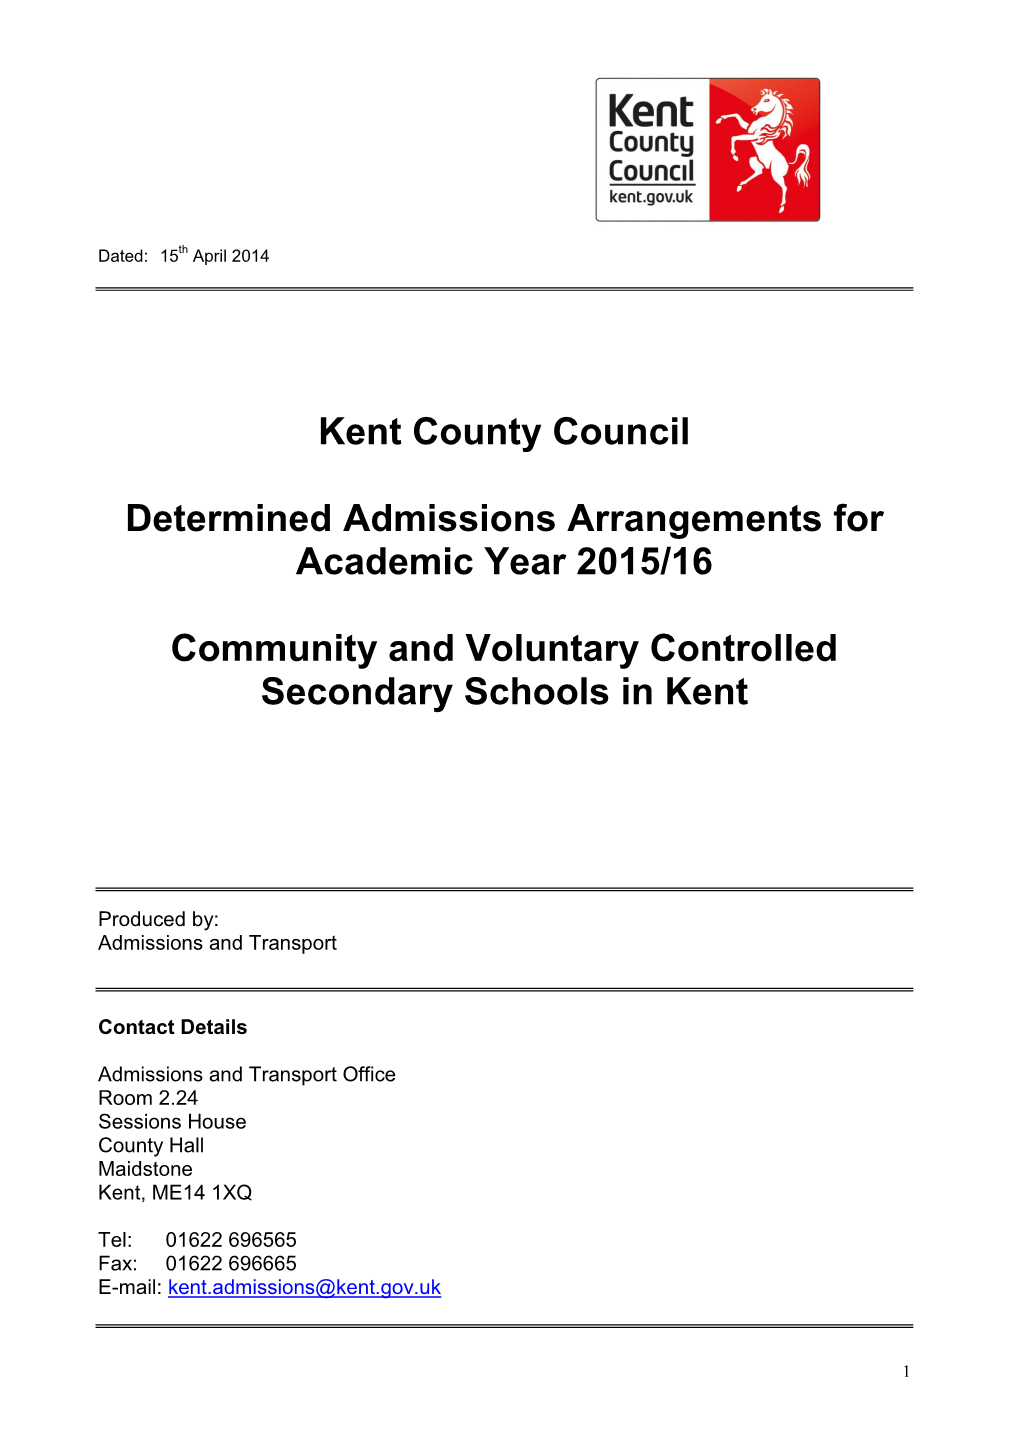 Kent County Council Determined Admissions Arrangements For